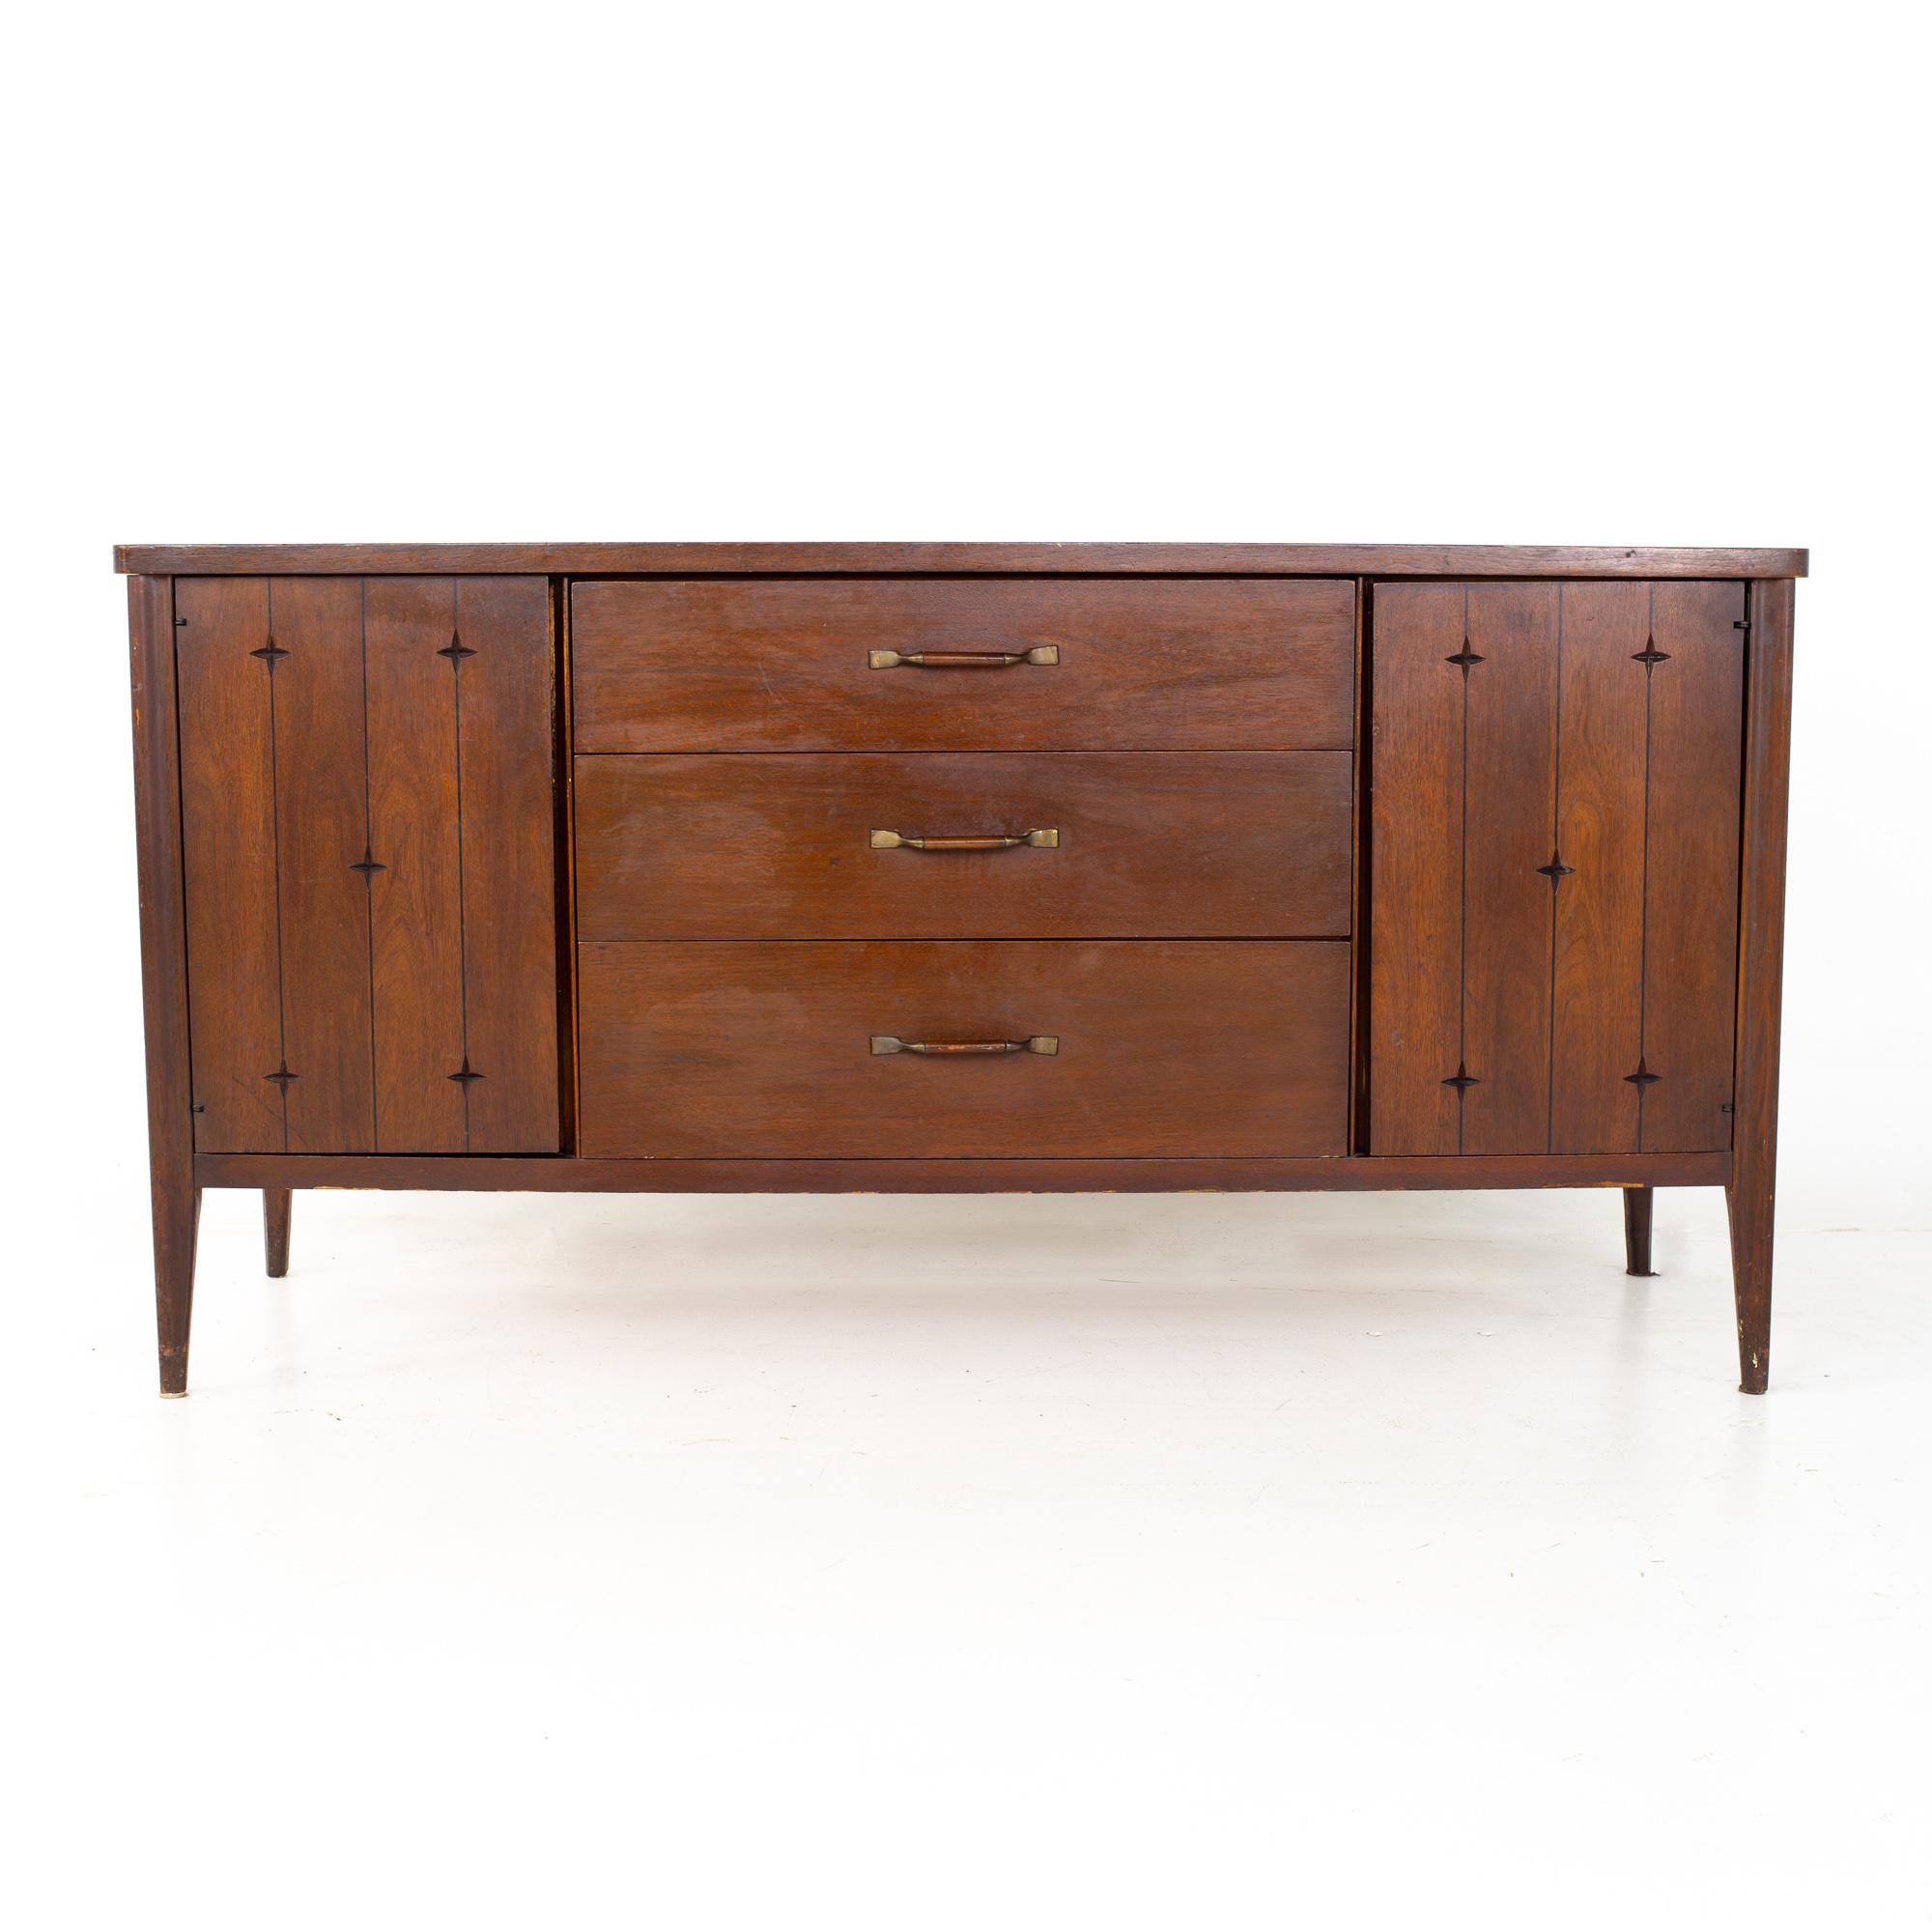 Broyhill saga mid century walnut sideboard buffet credenza

Credenza measures: 52.5 wide x 19.25 deep x 31 inches high

?All pieces of furniture can be had in what we call restored vintage condition. That means the piece is restored upon